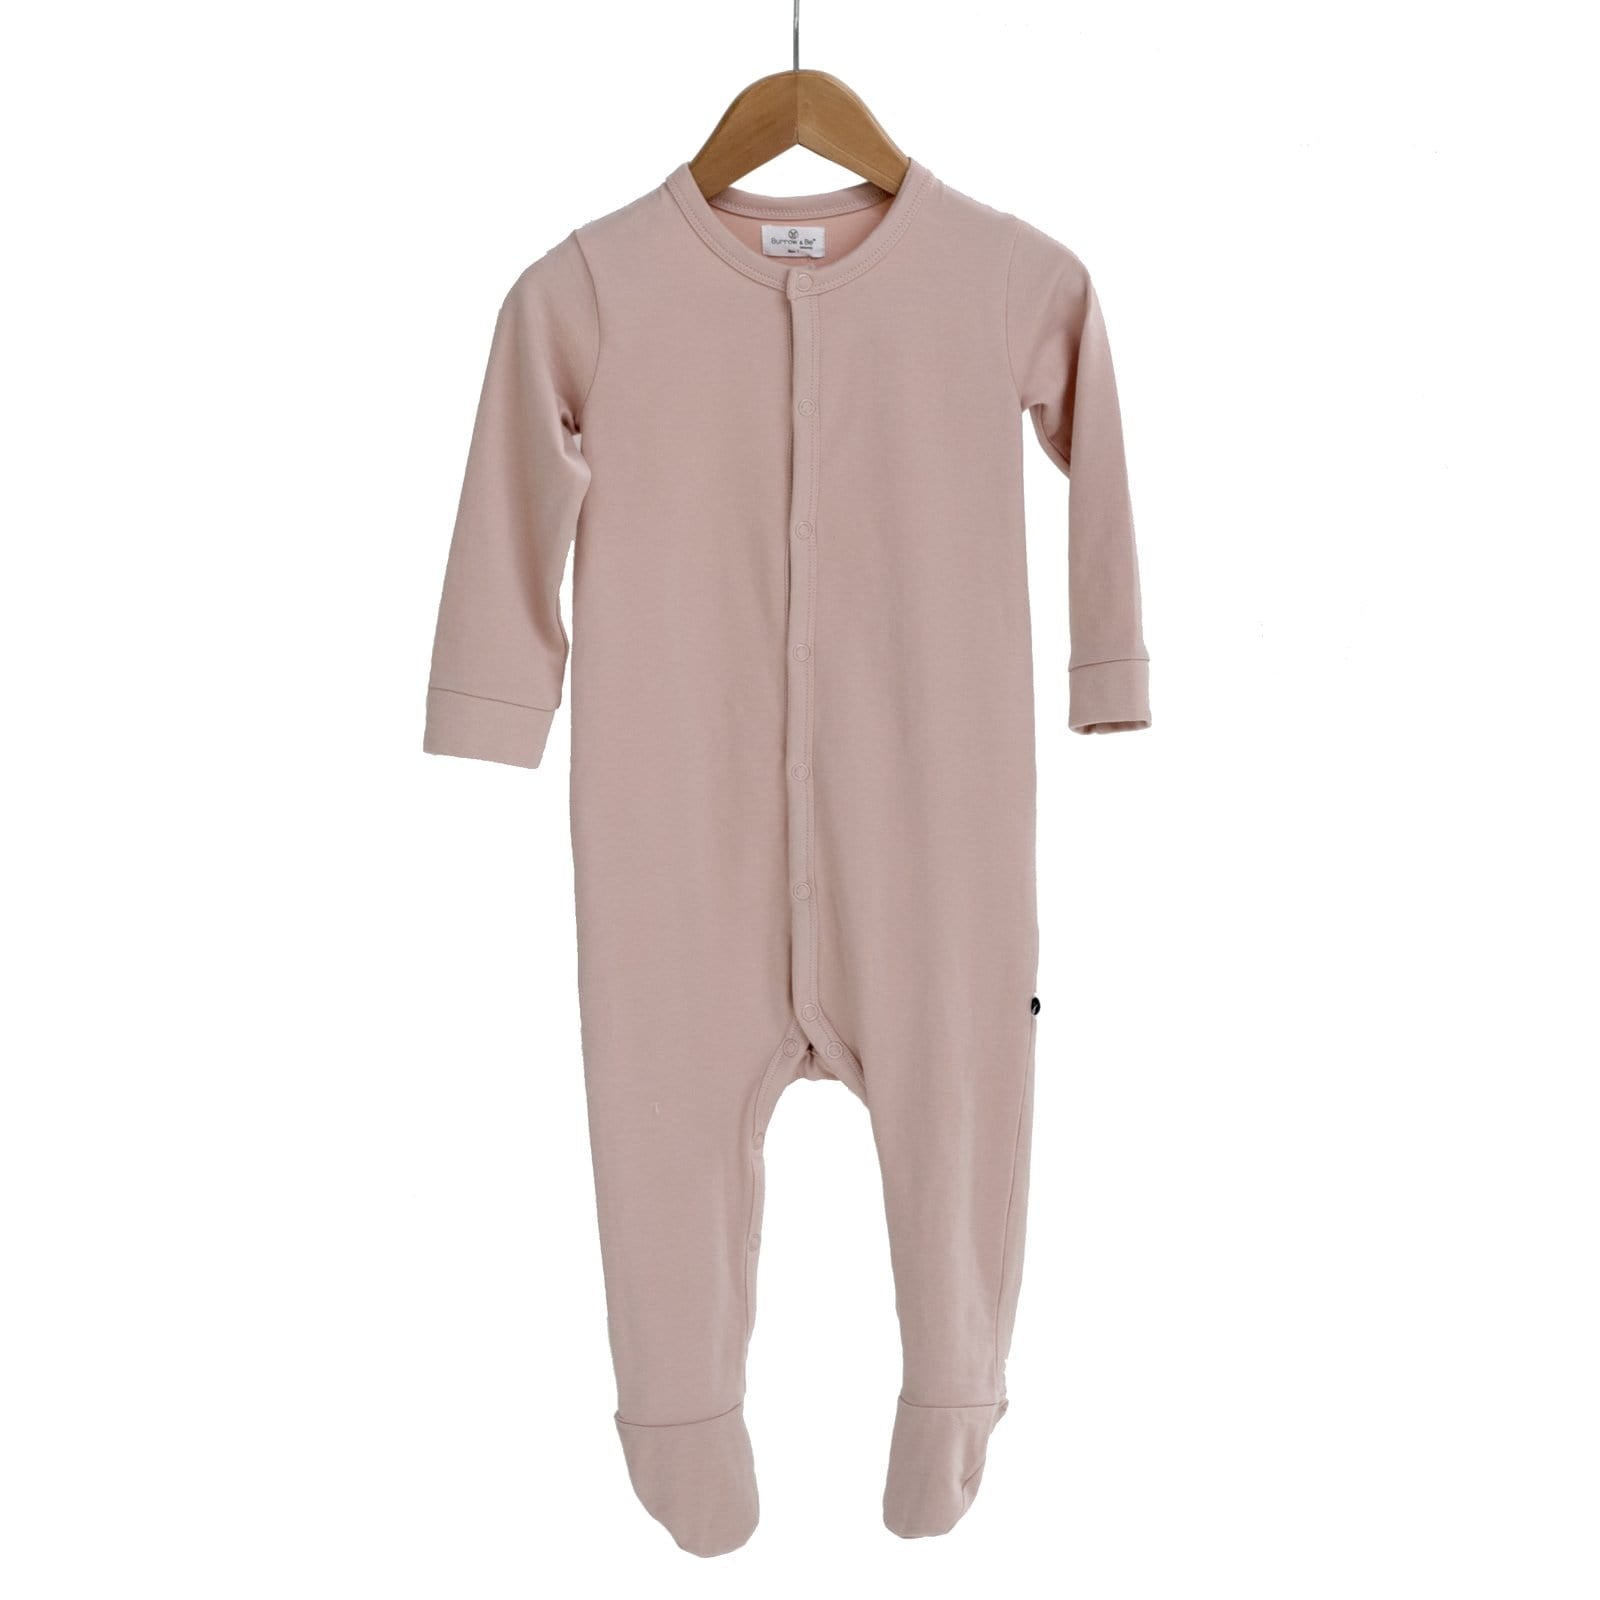 Burrow & Be Unisex Outfit Dusty Pink / 0-3M Organic Essentials Sleep Suit